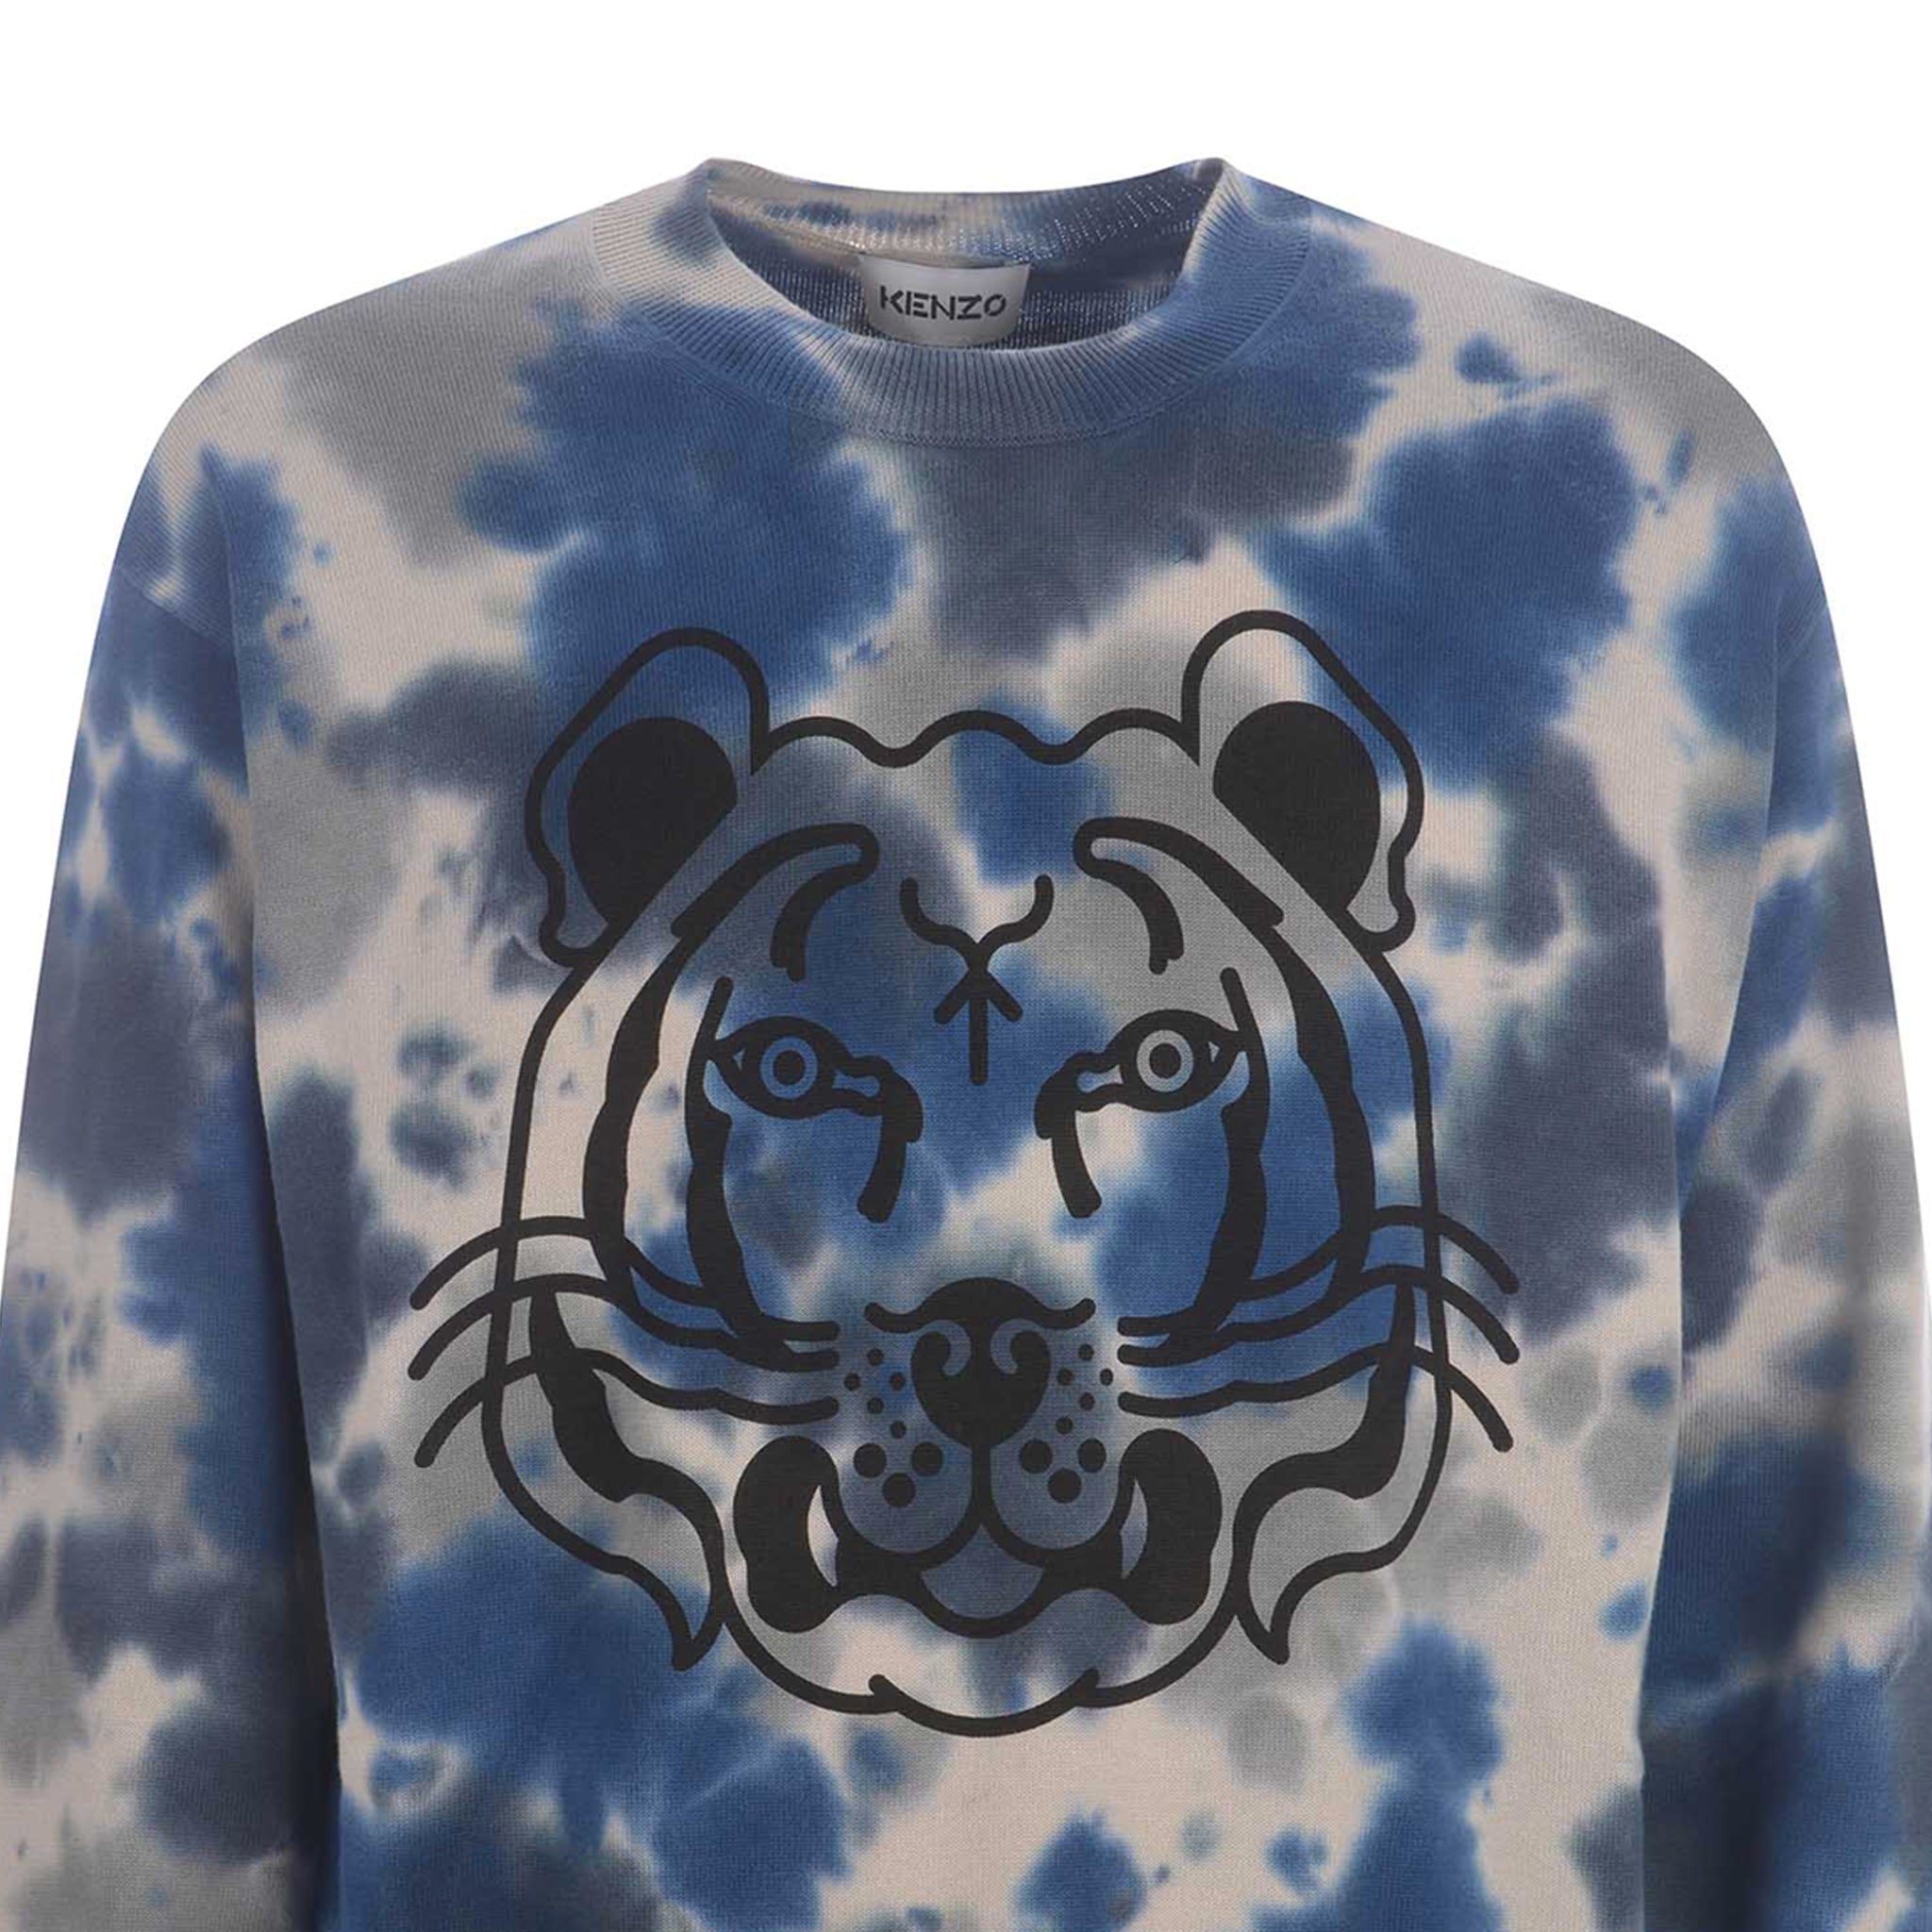 KENZO-OUTLET-SALE-Kenzo-Cotton-Printed-Sweater-Strick-ARCHIVE-COLLECTION-3.jpg